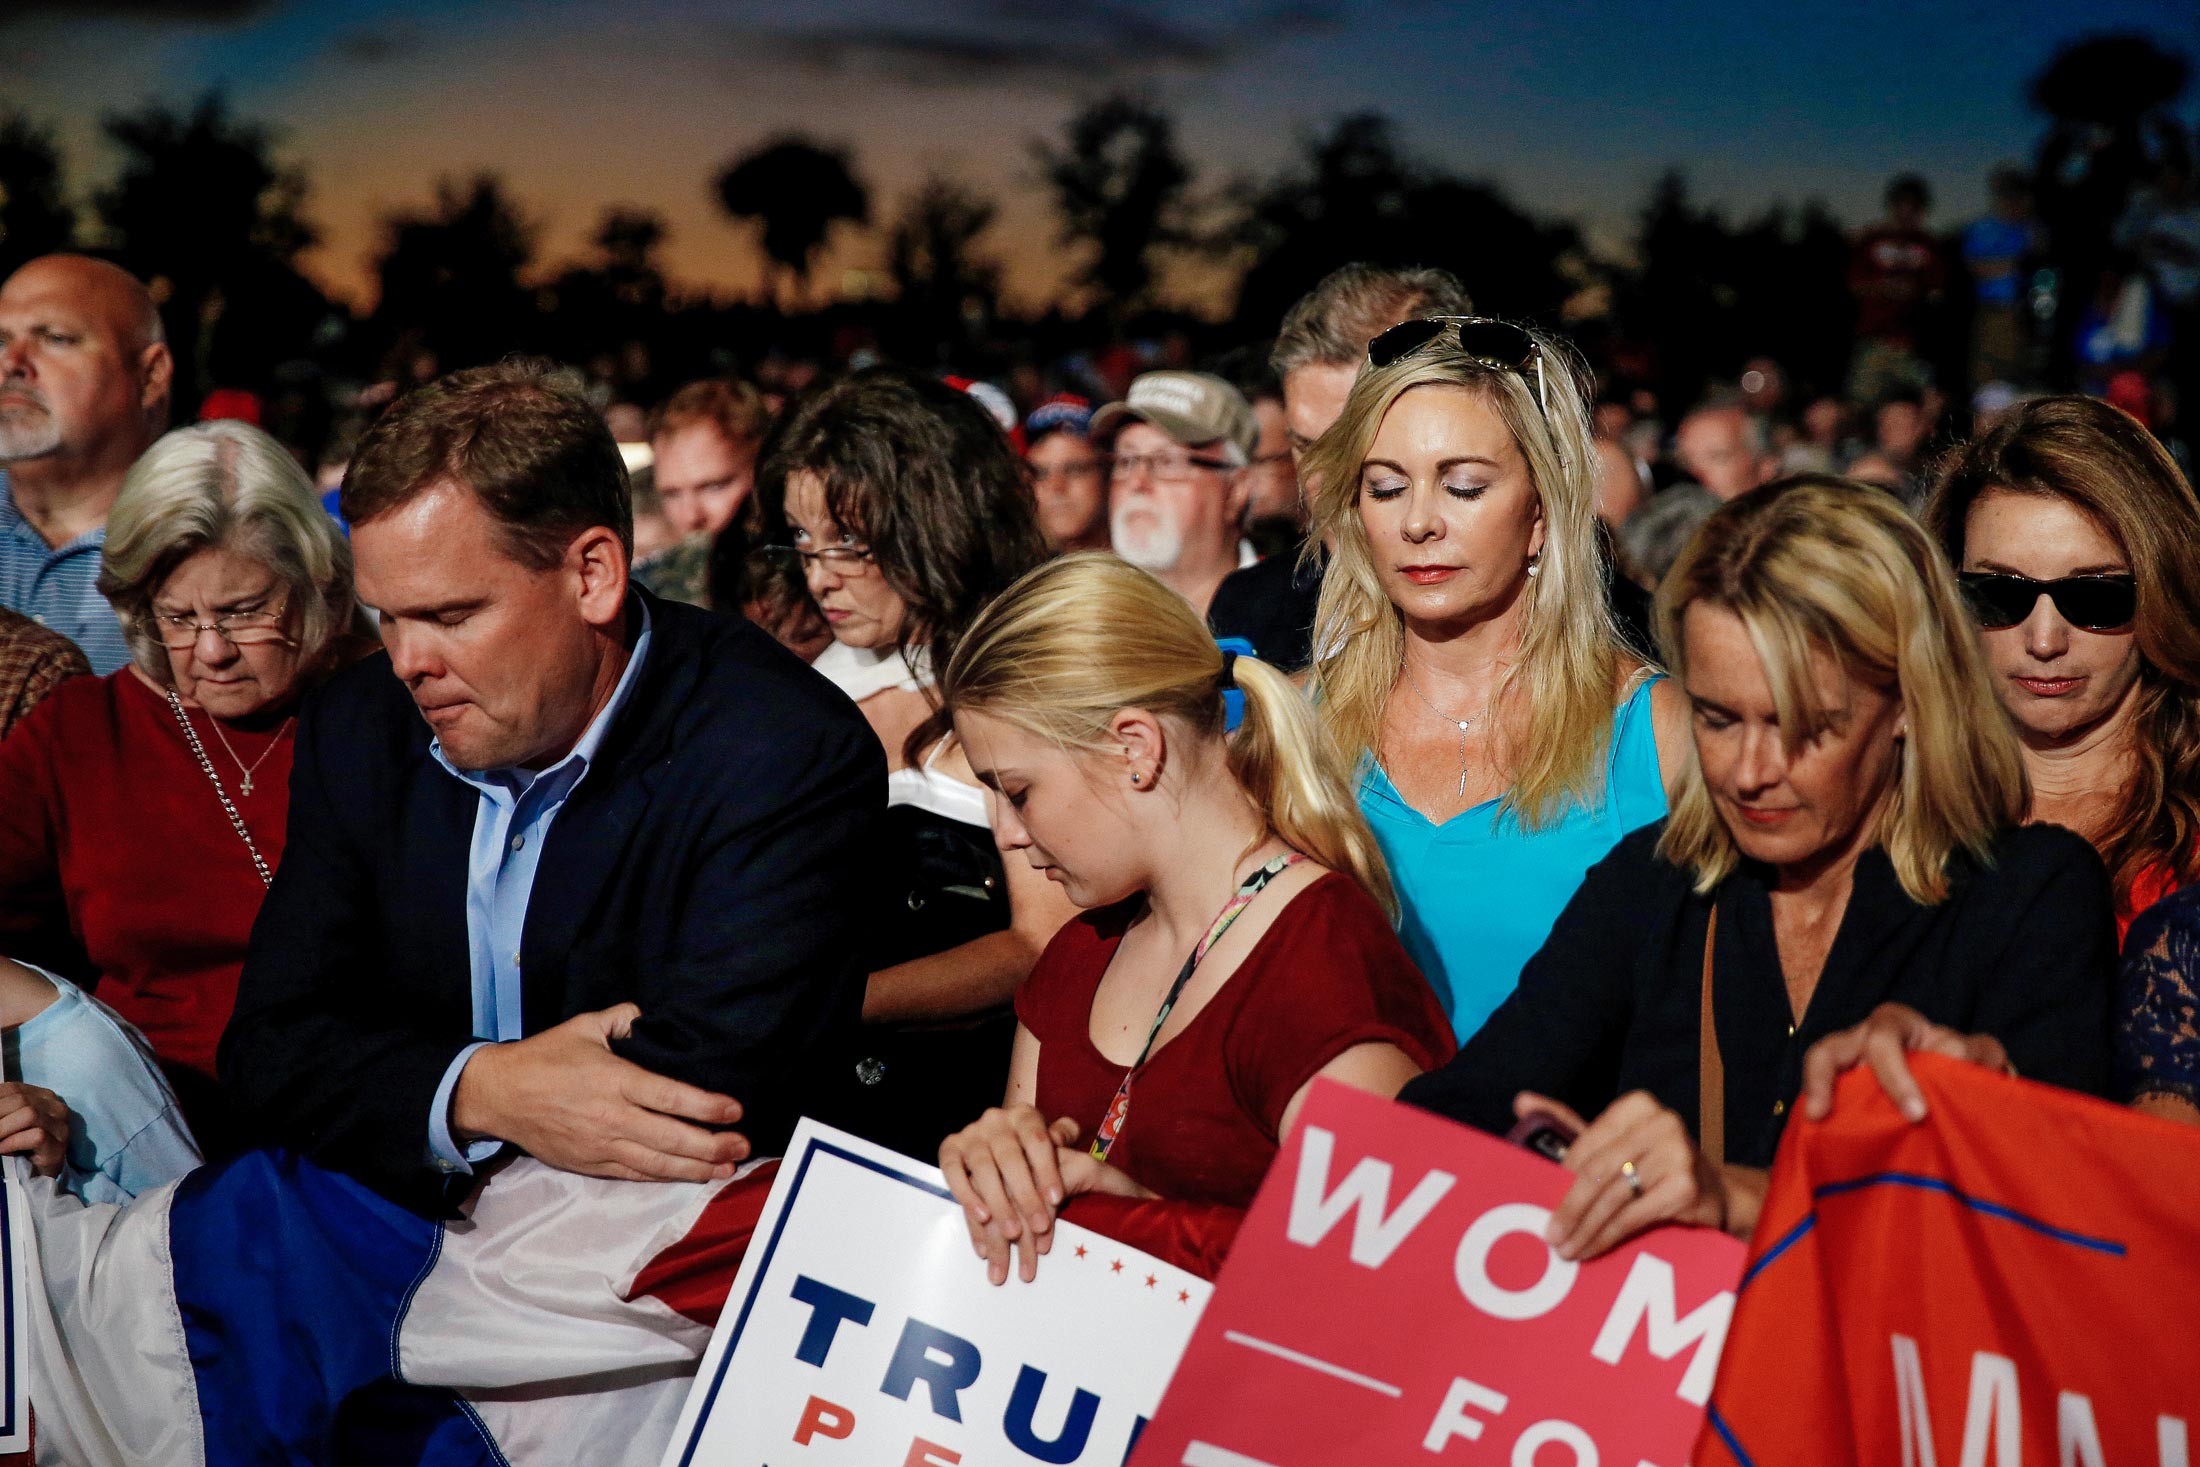 Supporters bow their heads in prayer before a Trump rally.